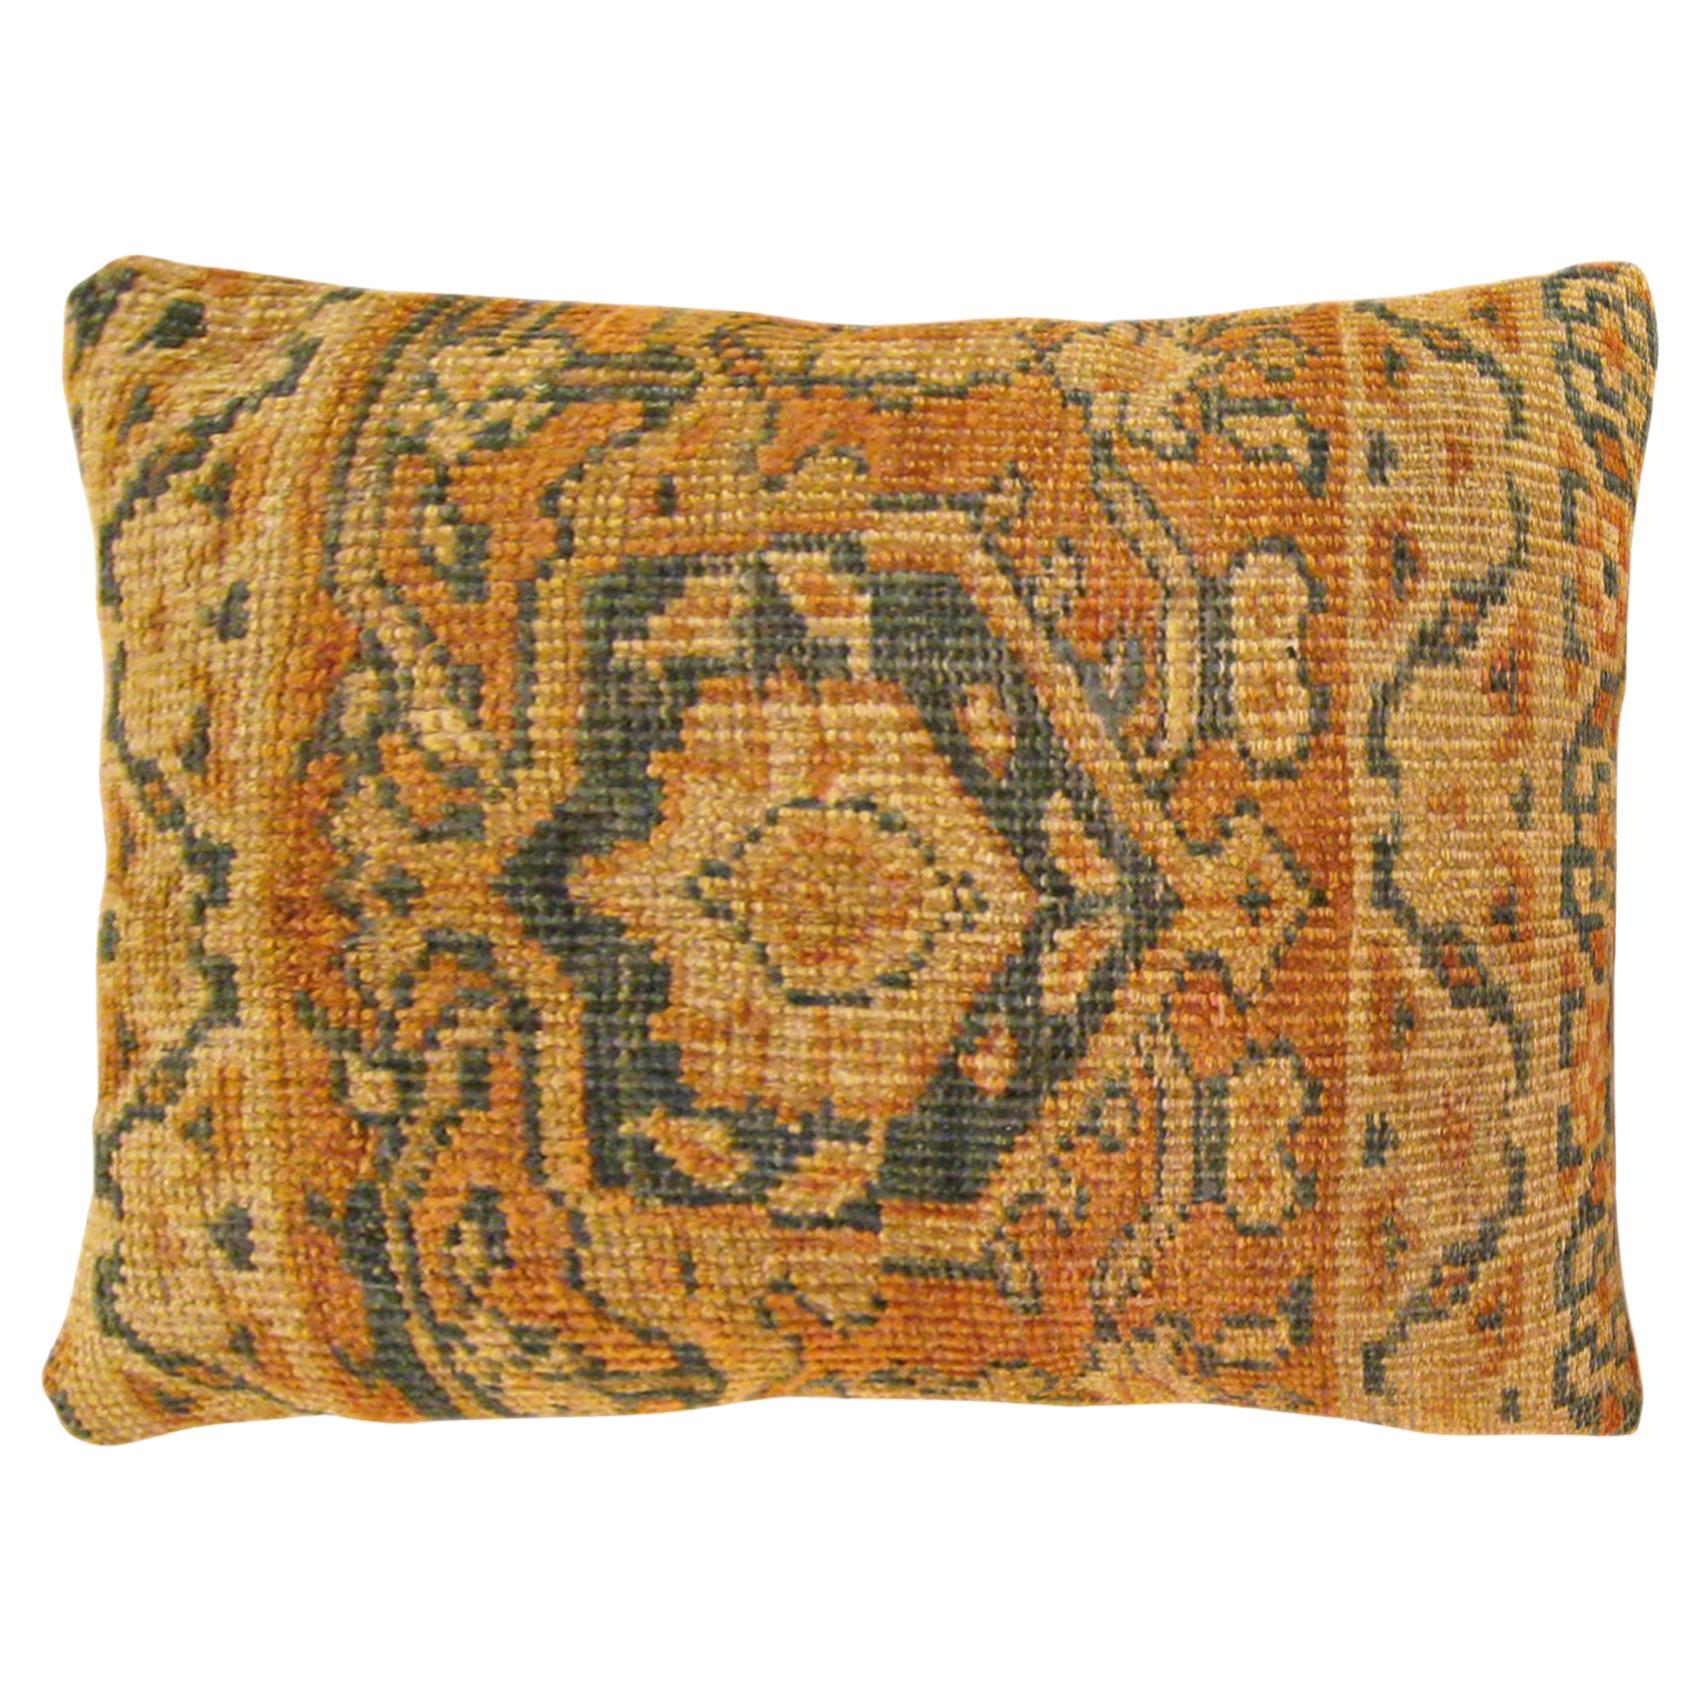 Decorative Antique Persian Sultanabad Pillow with A Central Medallion For Sale